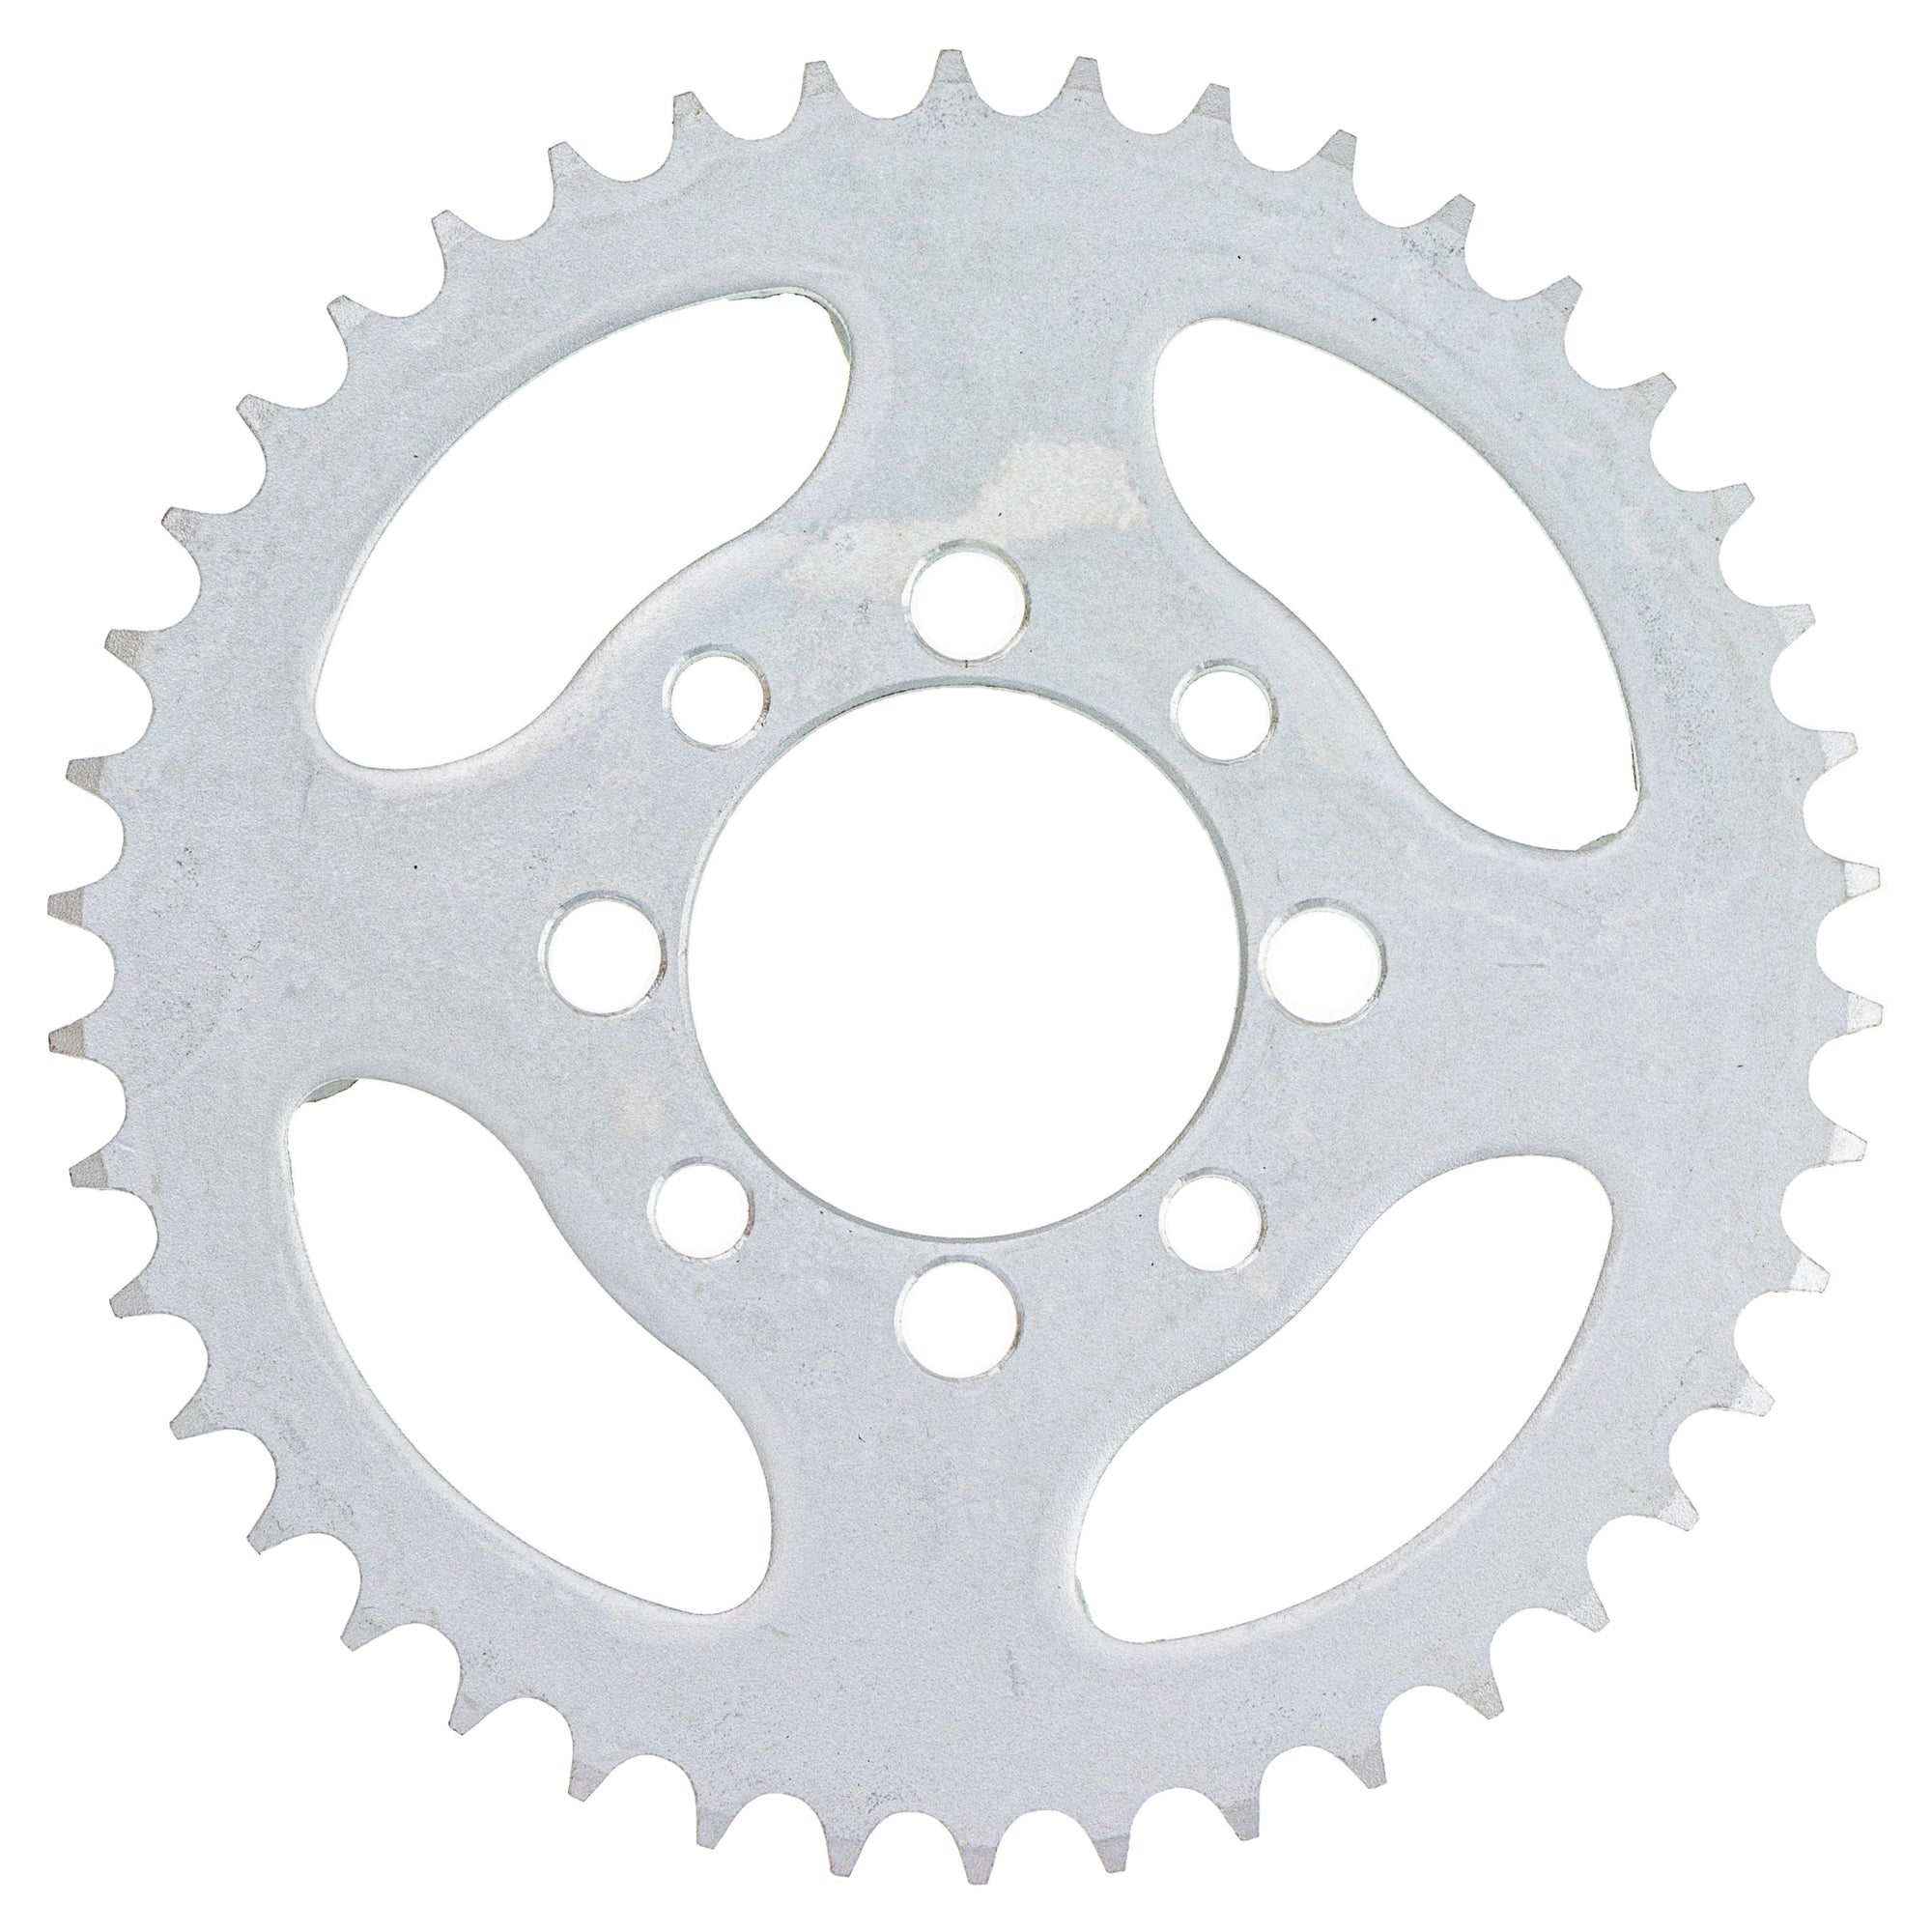 428 Pitch Front 14T Rear 42T Drive Sprocket Kit for Suzuki RM80 TS80